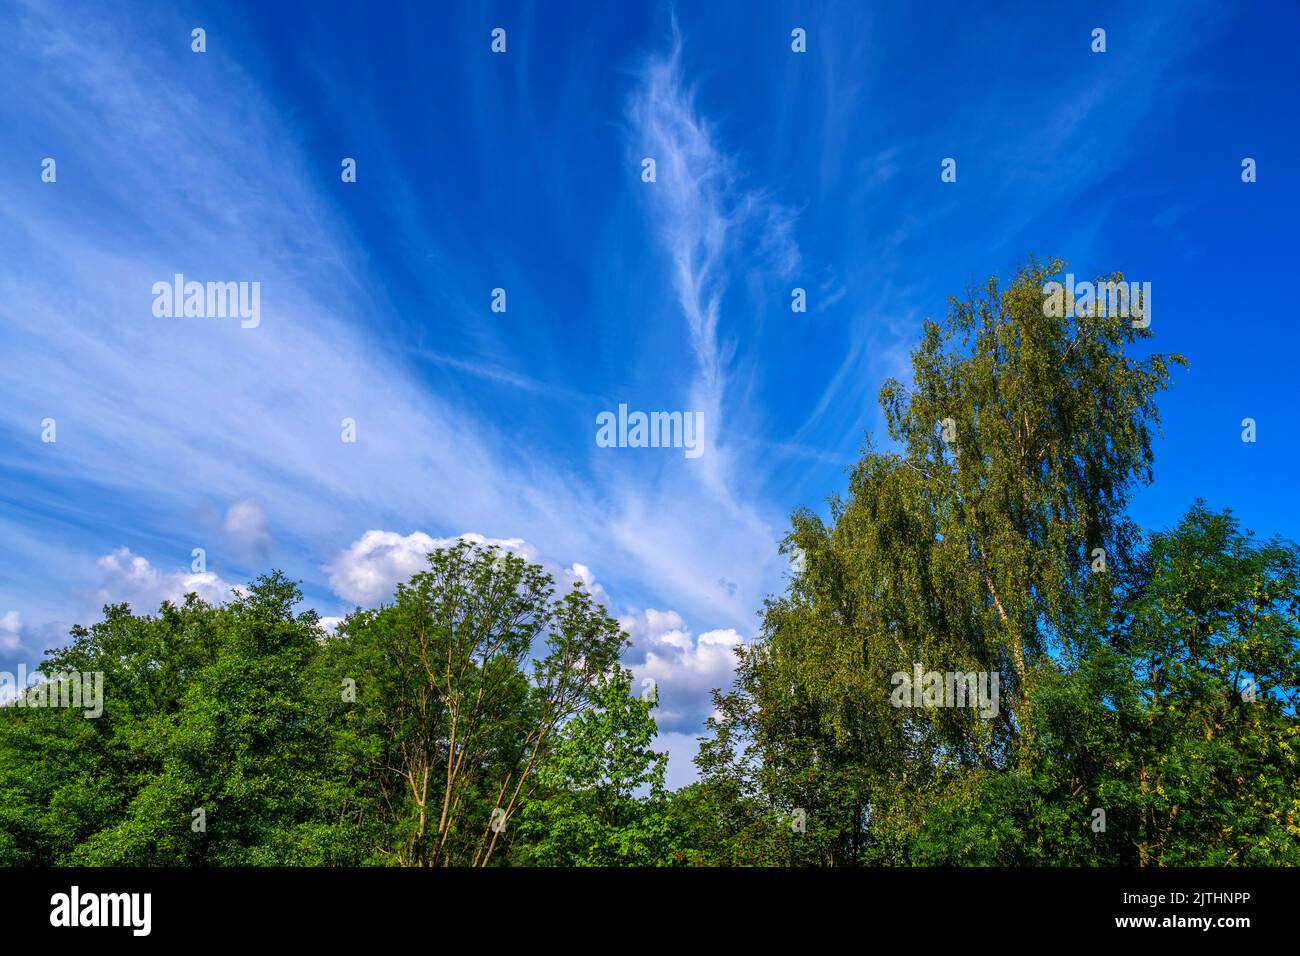 Green tree crown and blue sky with veil cloud in sunny summer day. Stock Photo